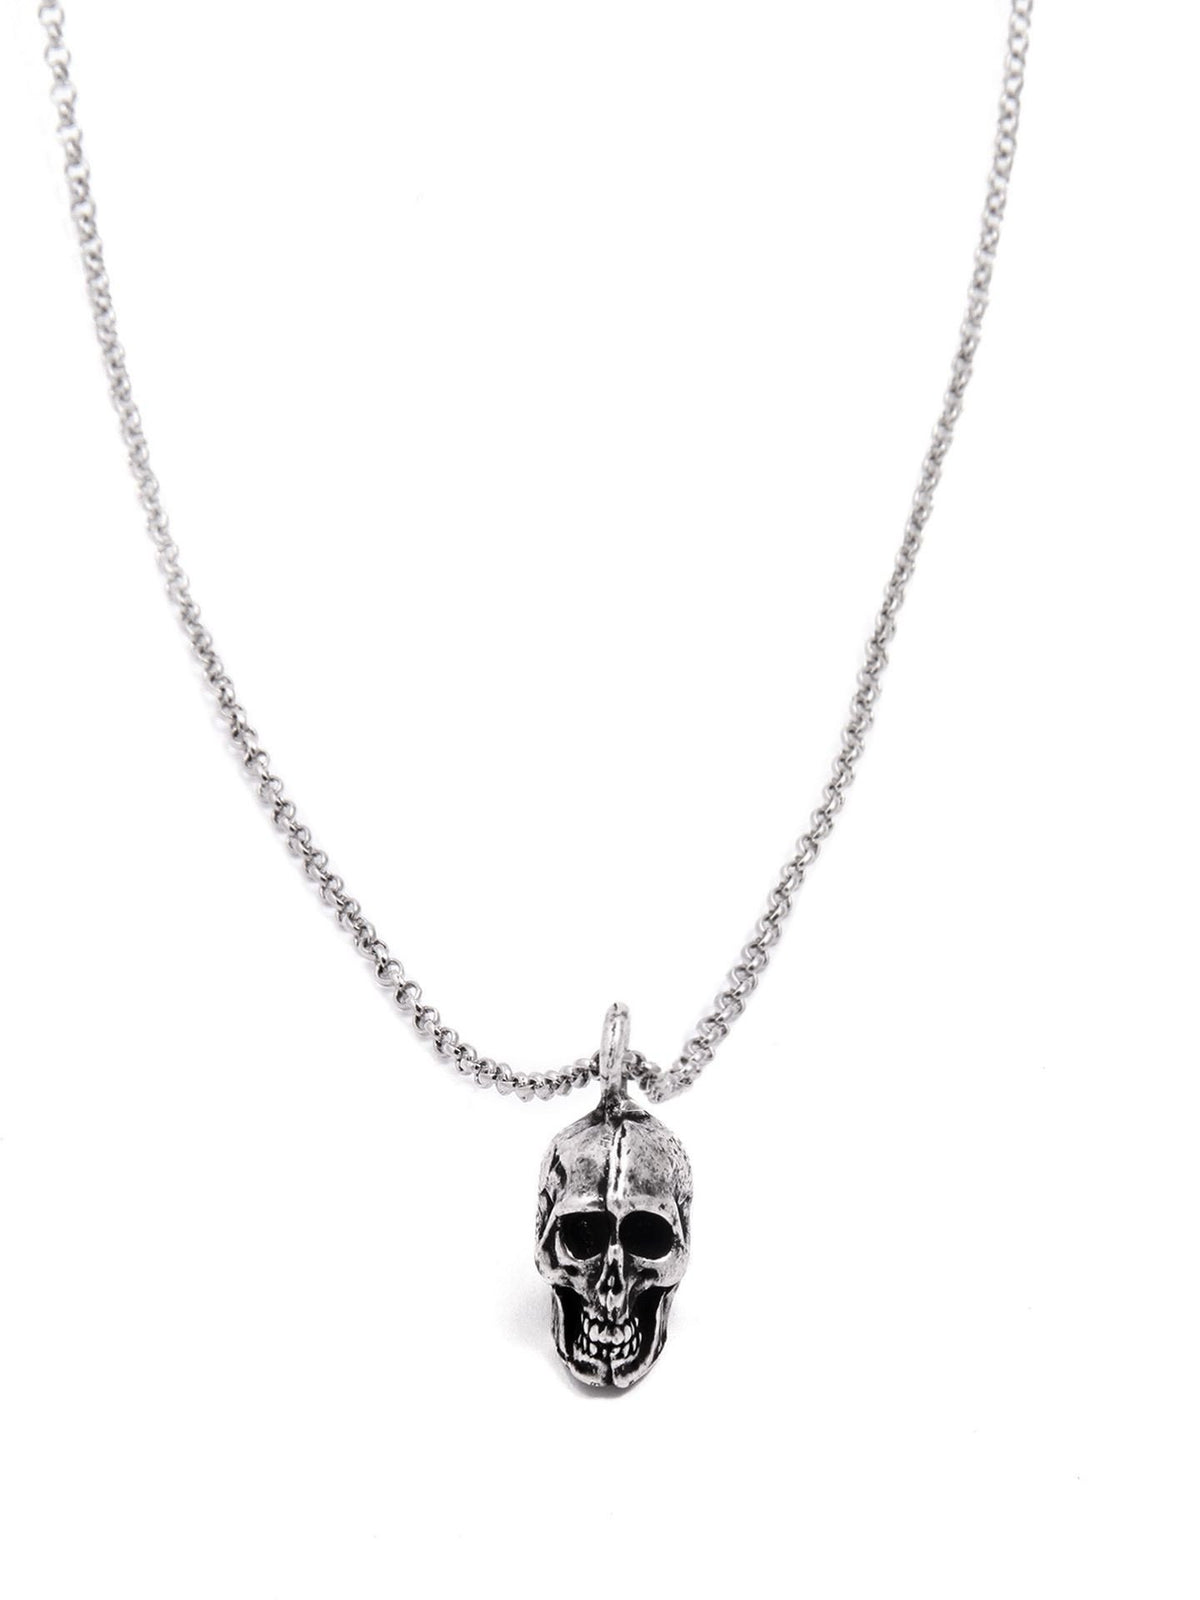 Small Silver Human Skull Necklace by Blue Bayer Design - www.inkedshop.com